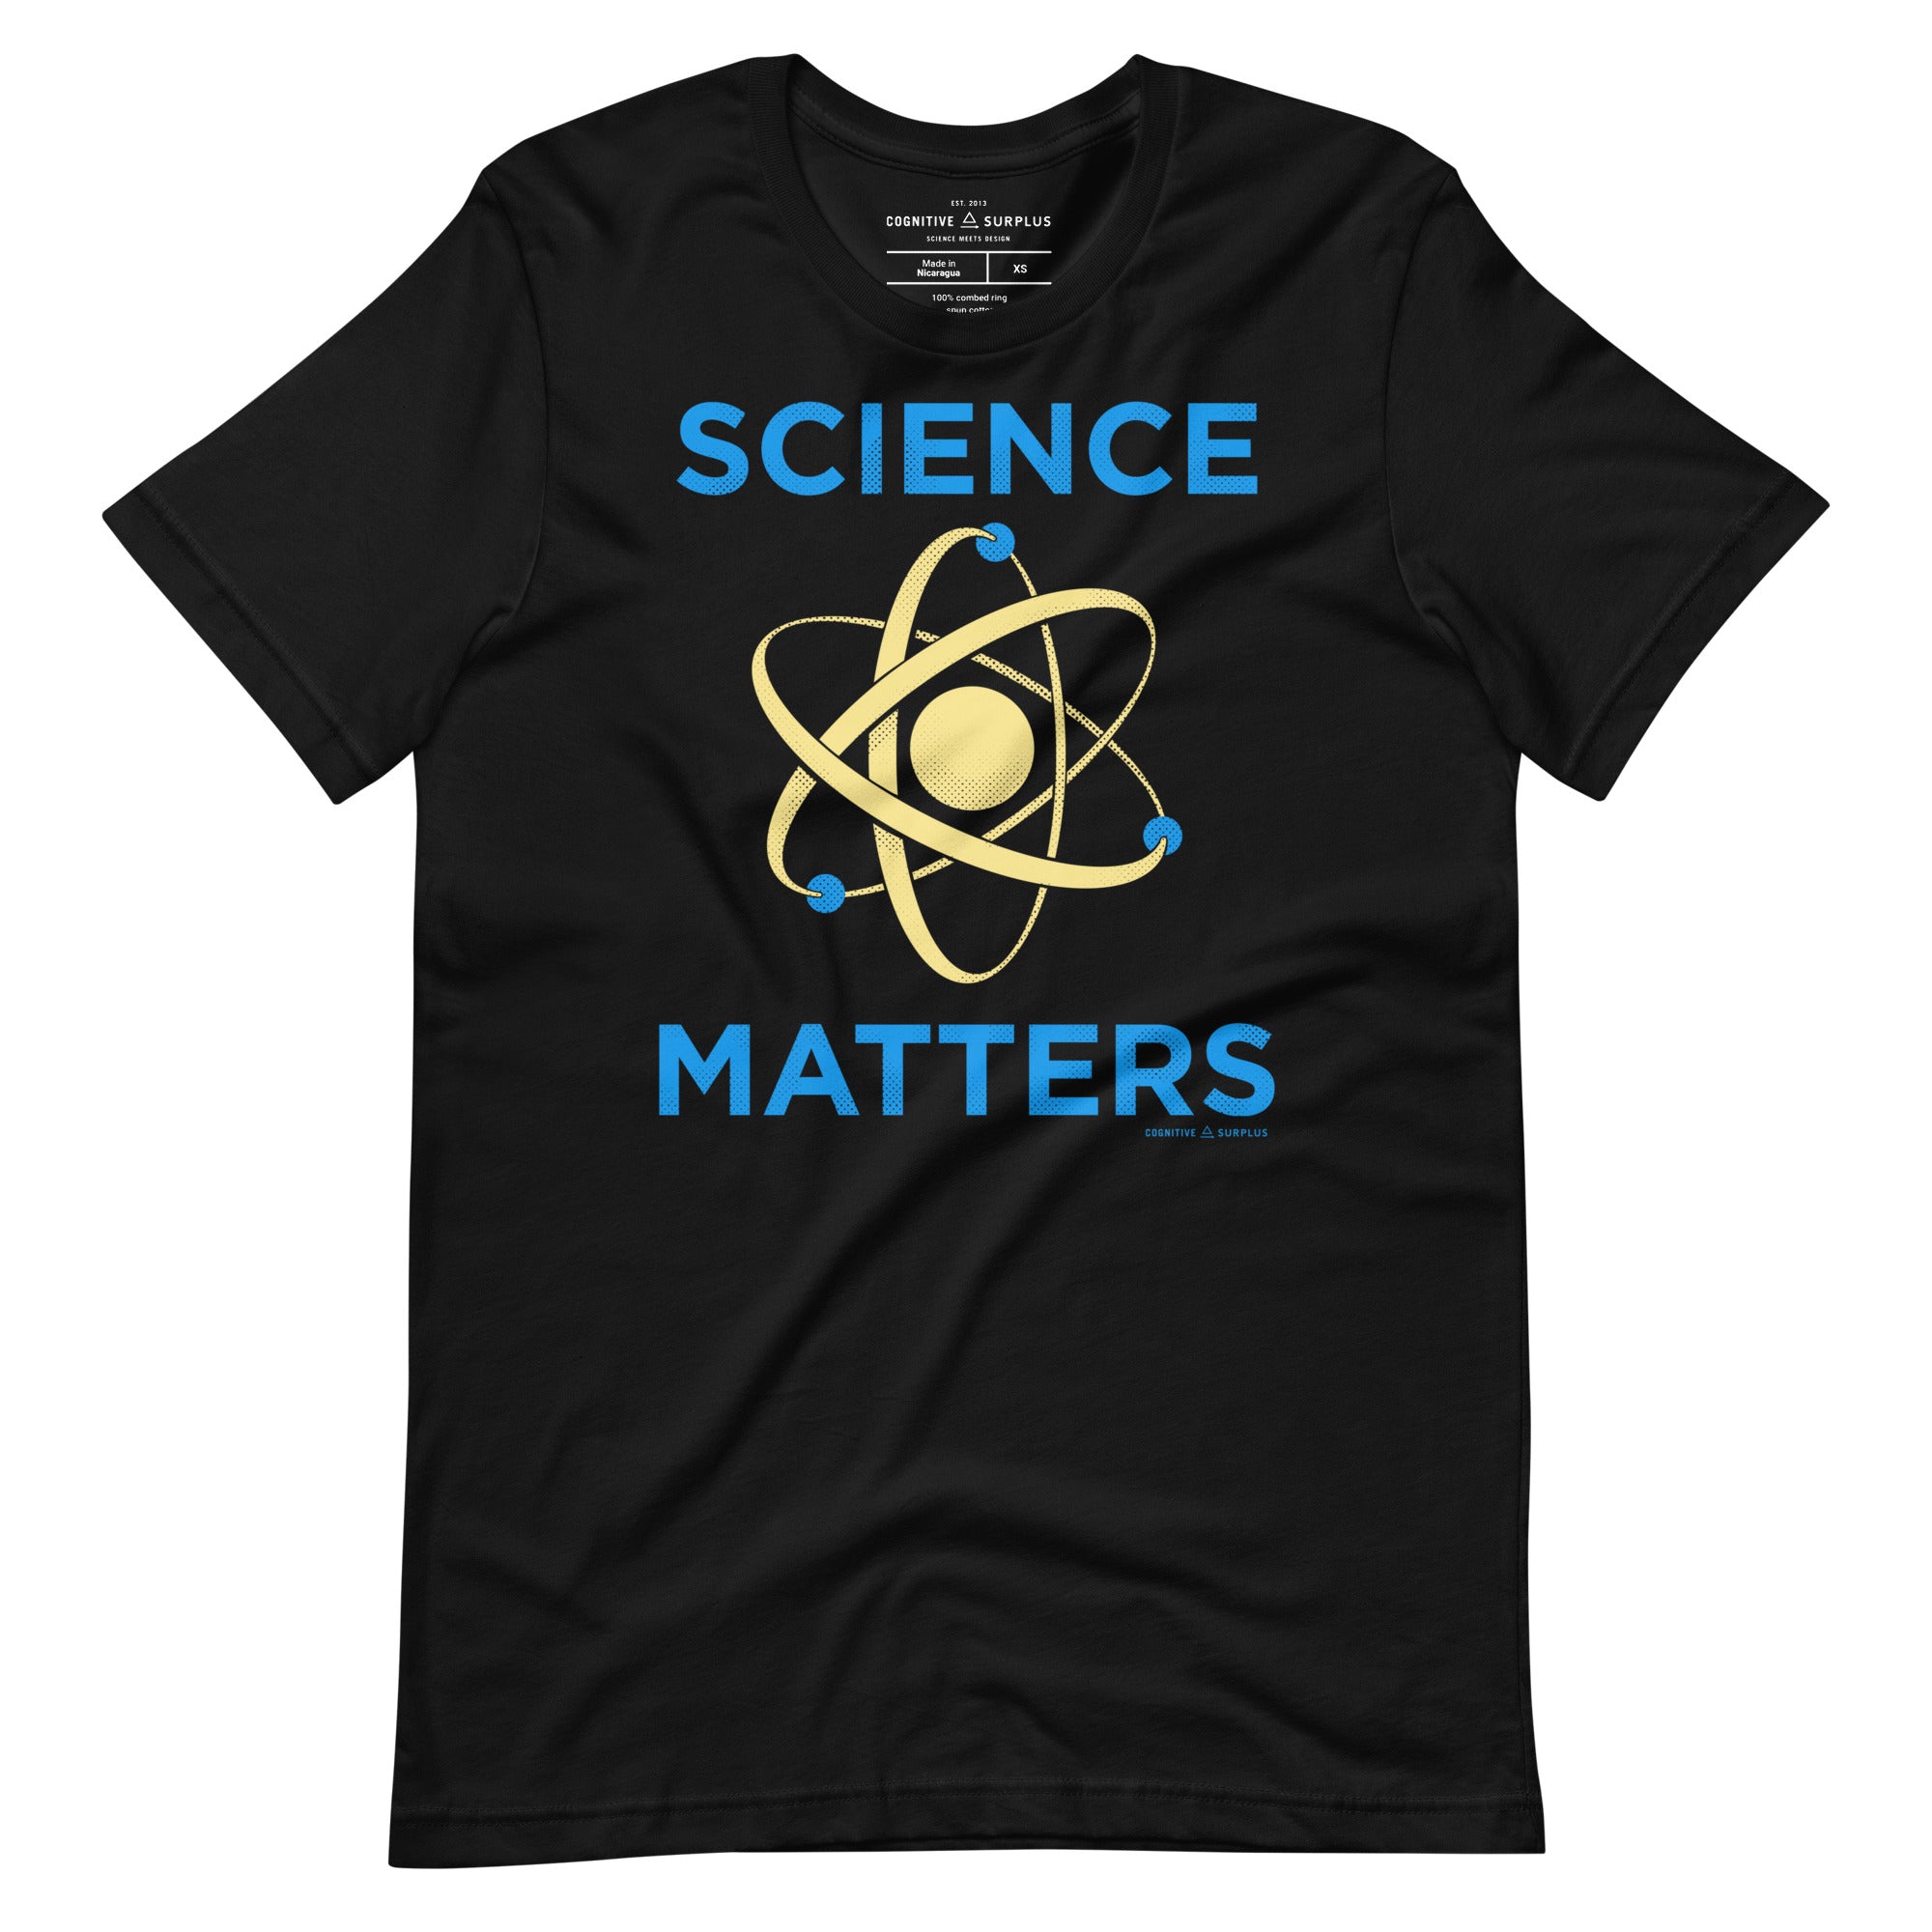 Science Matters Graphic Tee